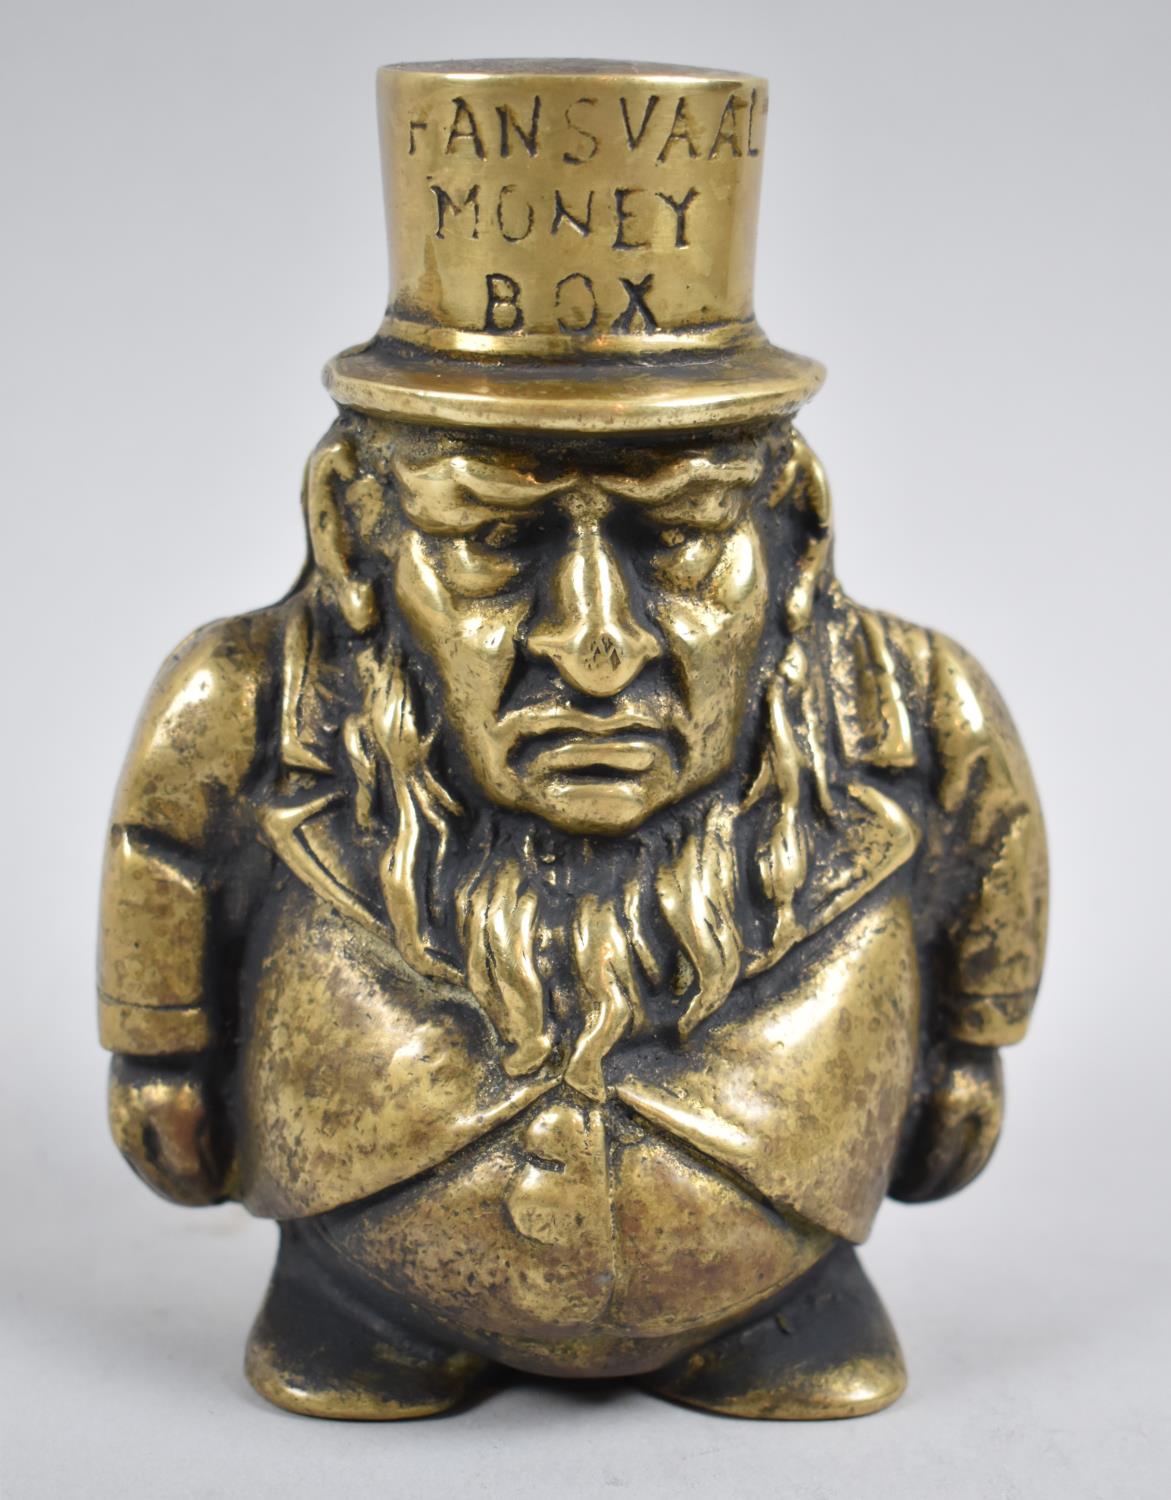 A Late 19th Century Heavy Cast Brass Novelty Money Box in the Form of Paul Kruger with Transvaal